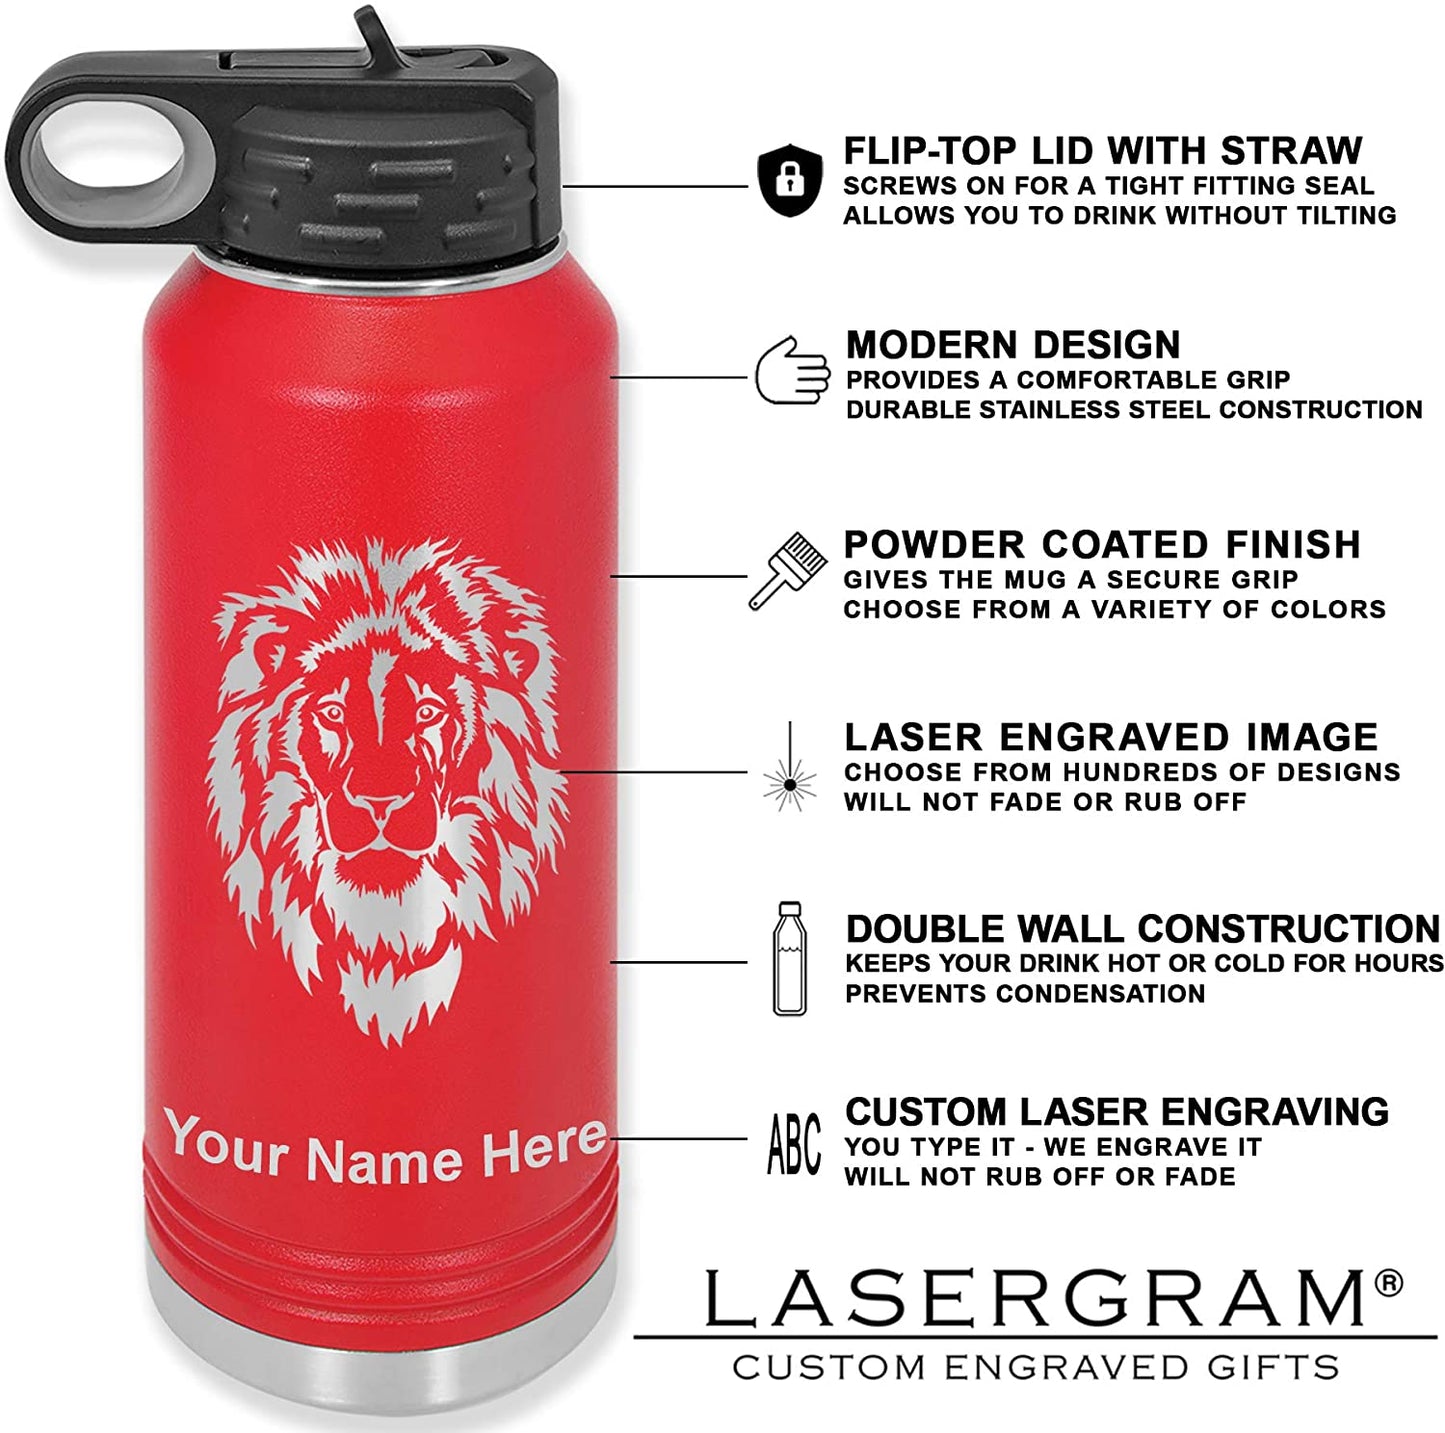 LaserGram 32oz Double Wall Flip Top Water Bottle with Straw, Barrel Racer, Personalized Engraving Included